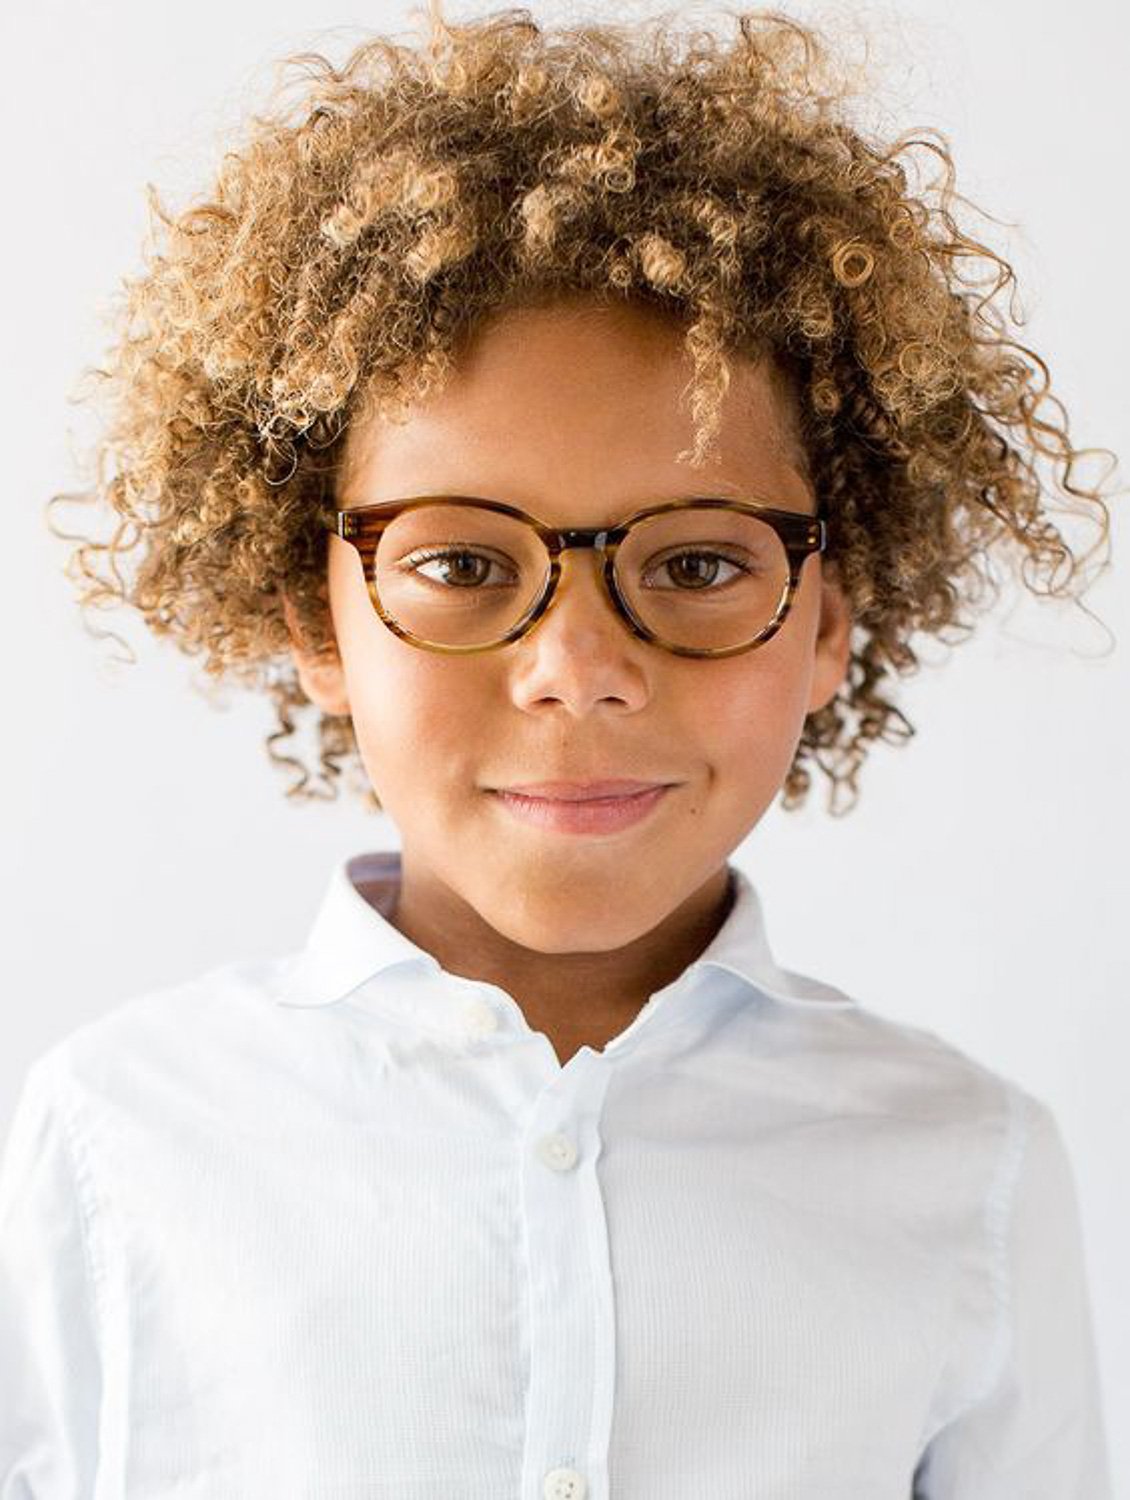 A close up of young boy with curly brown hair wearing glasses 